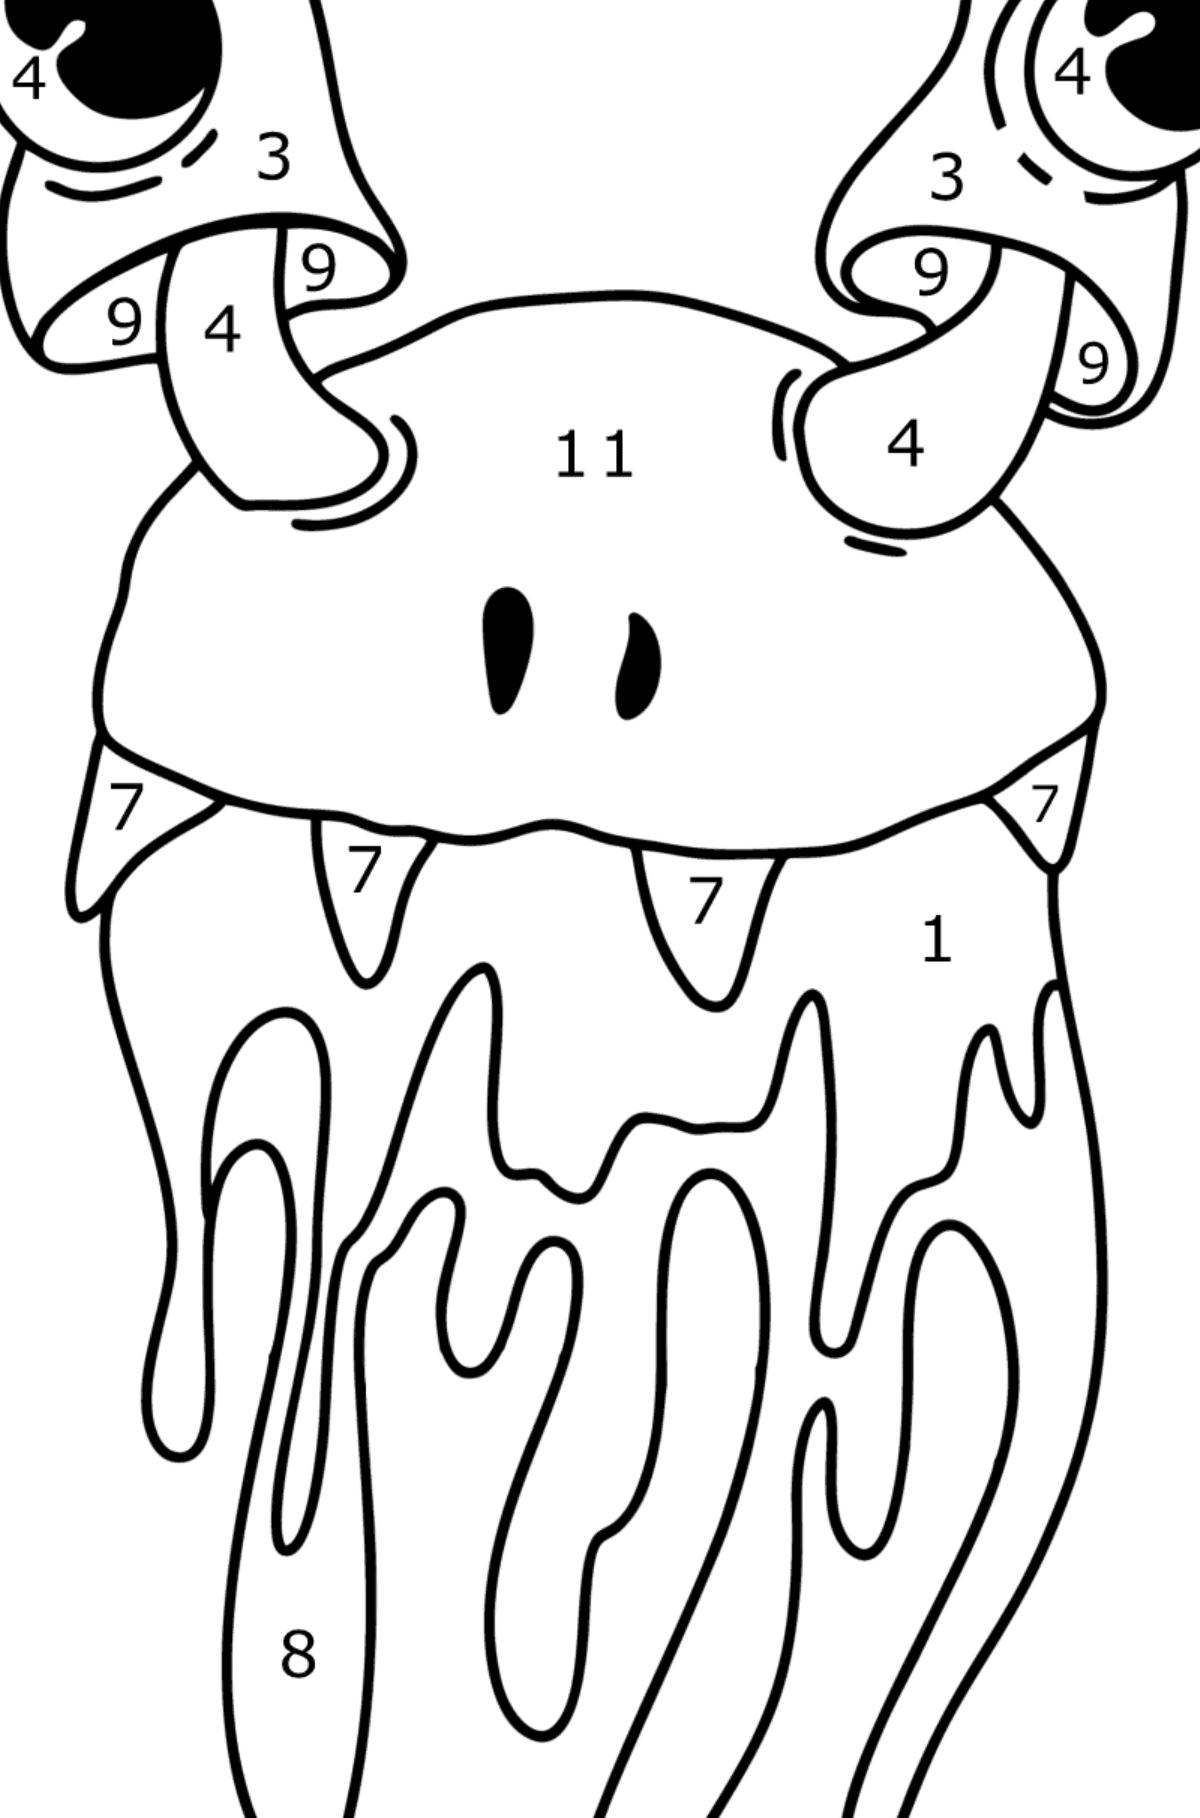 Cartoon monster face coloring page - Coloring by Numbers for Kids